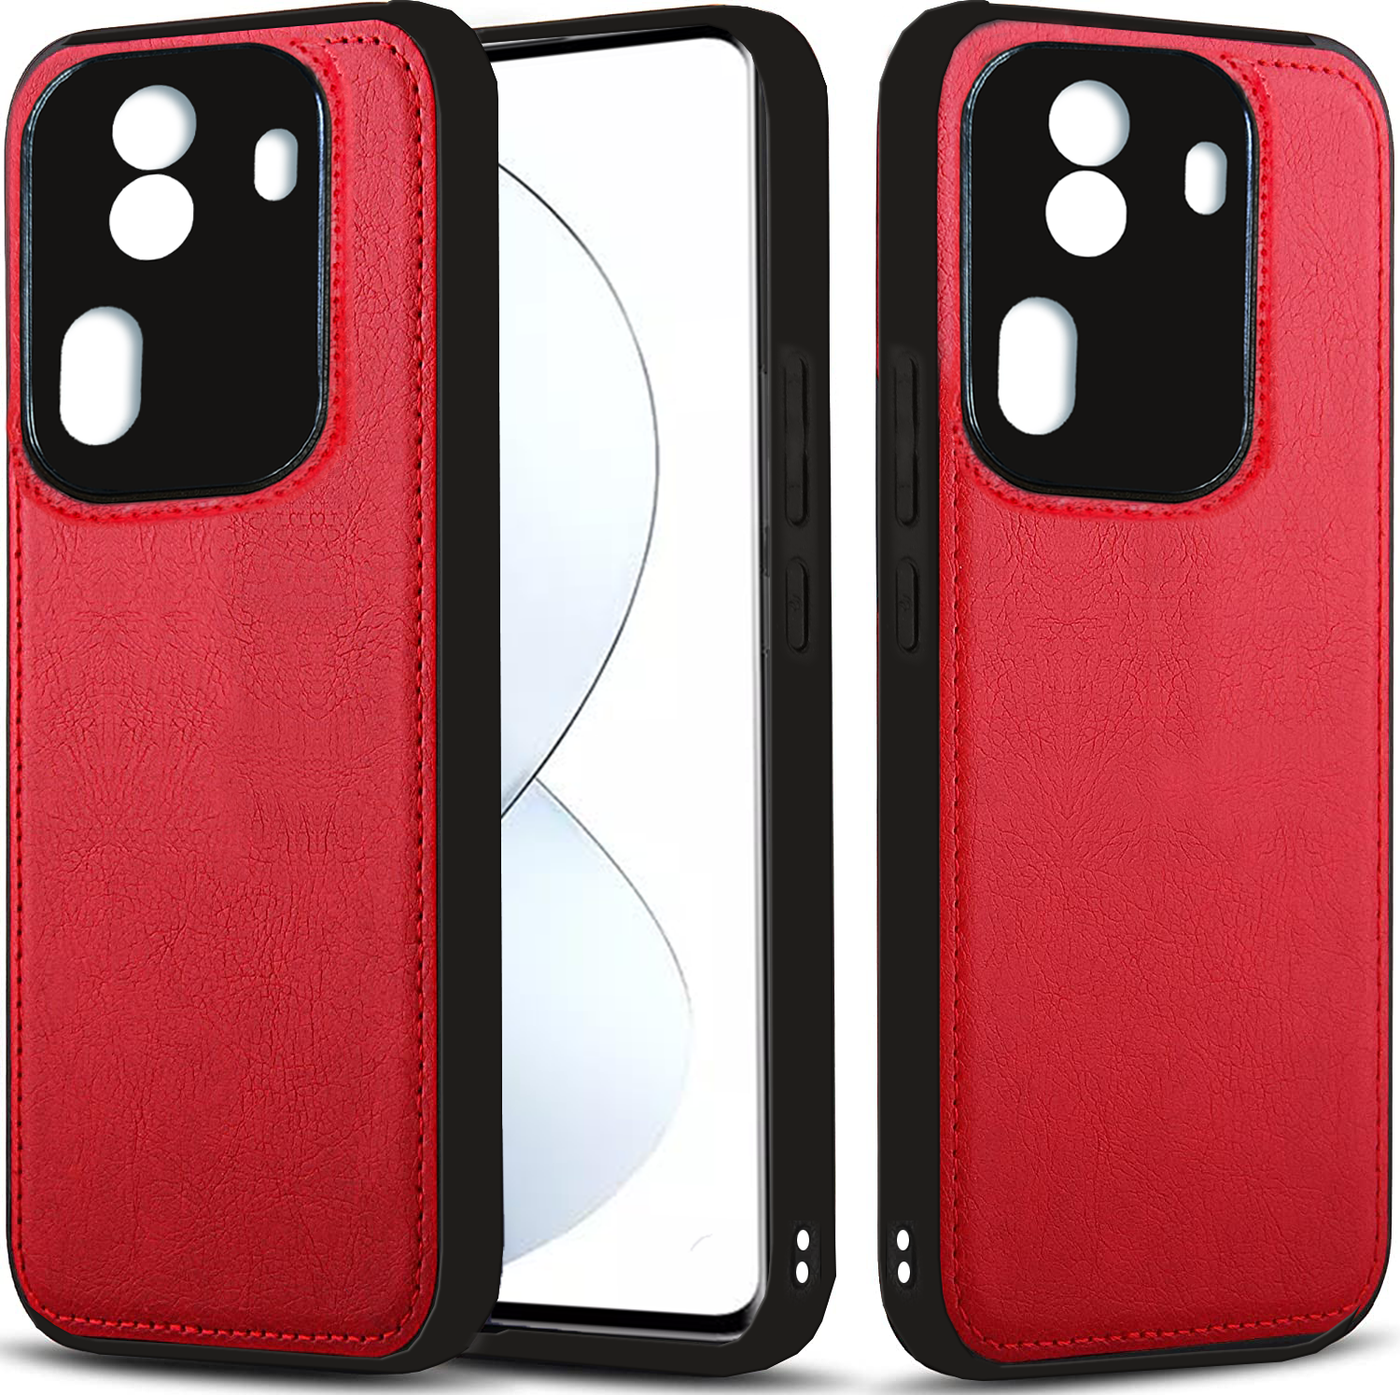 Oppo Reno 11 Pro 5G Premium PU Leather Back Cover Case By Excelsior